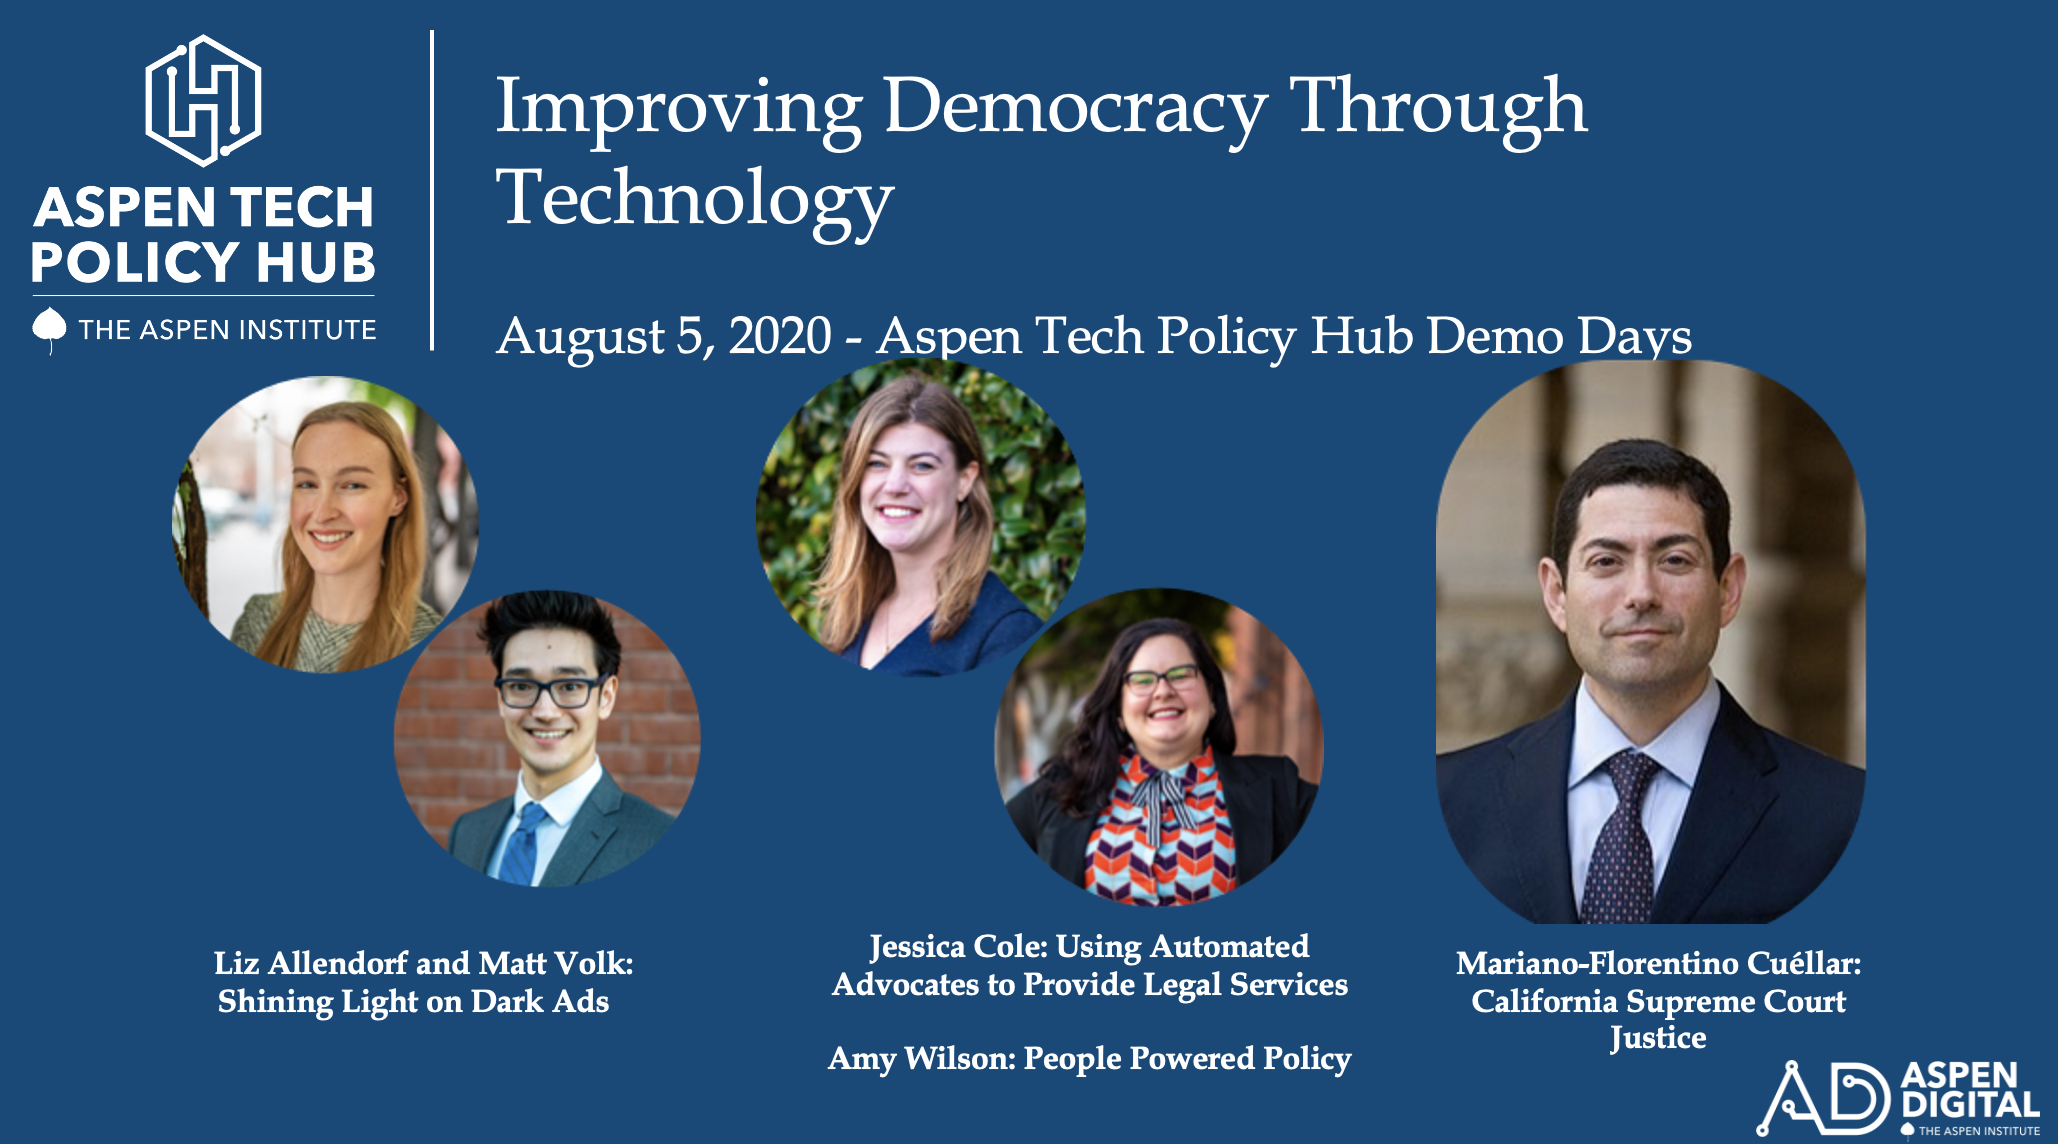 Aspen Tech Policy Hub: Projects on Improving Democracy Through Technology